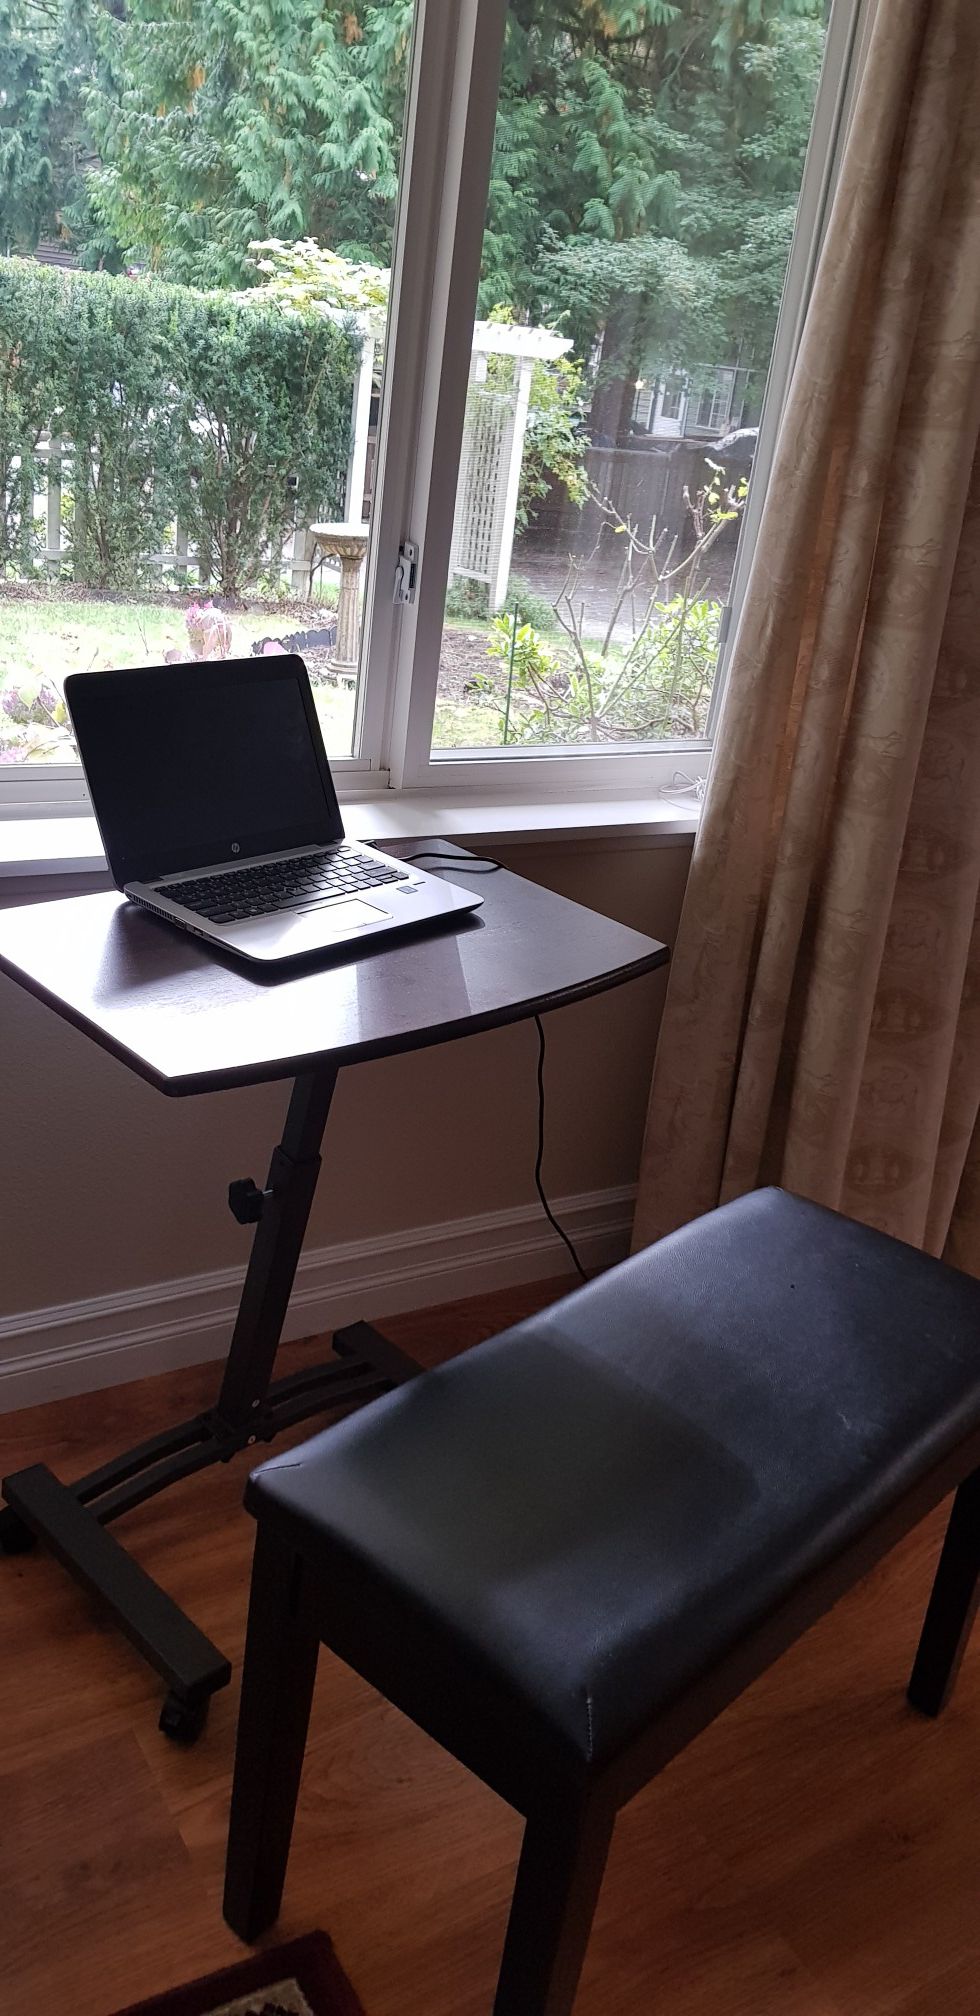 sitting desk that goes upto 33 inches is for sale